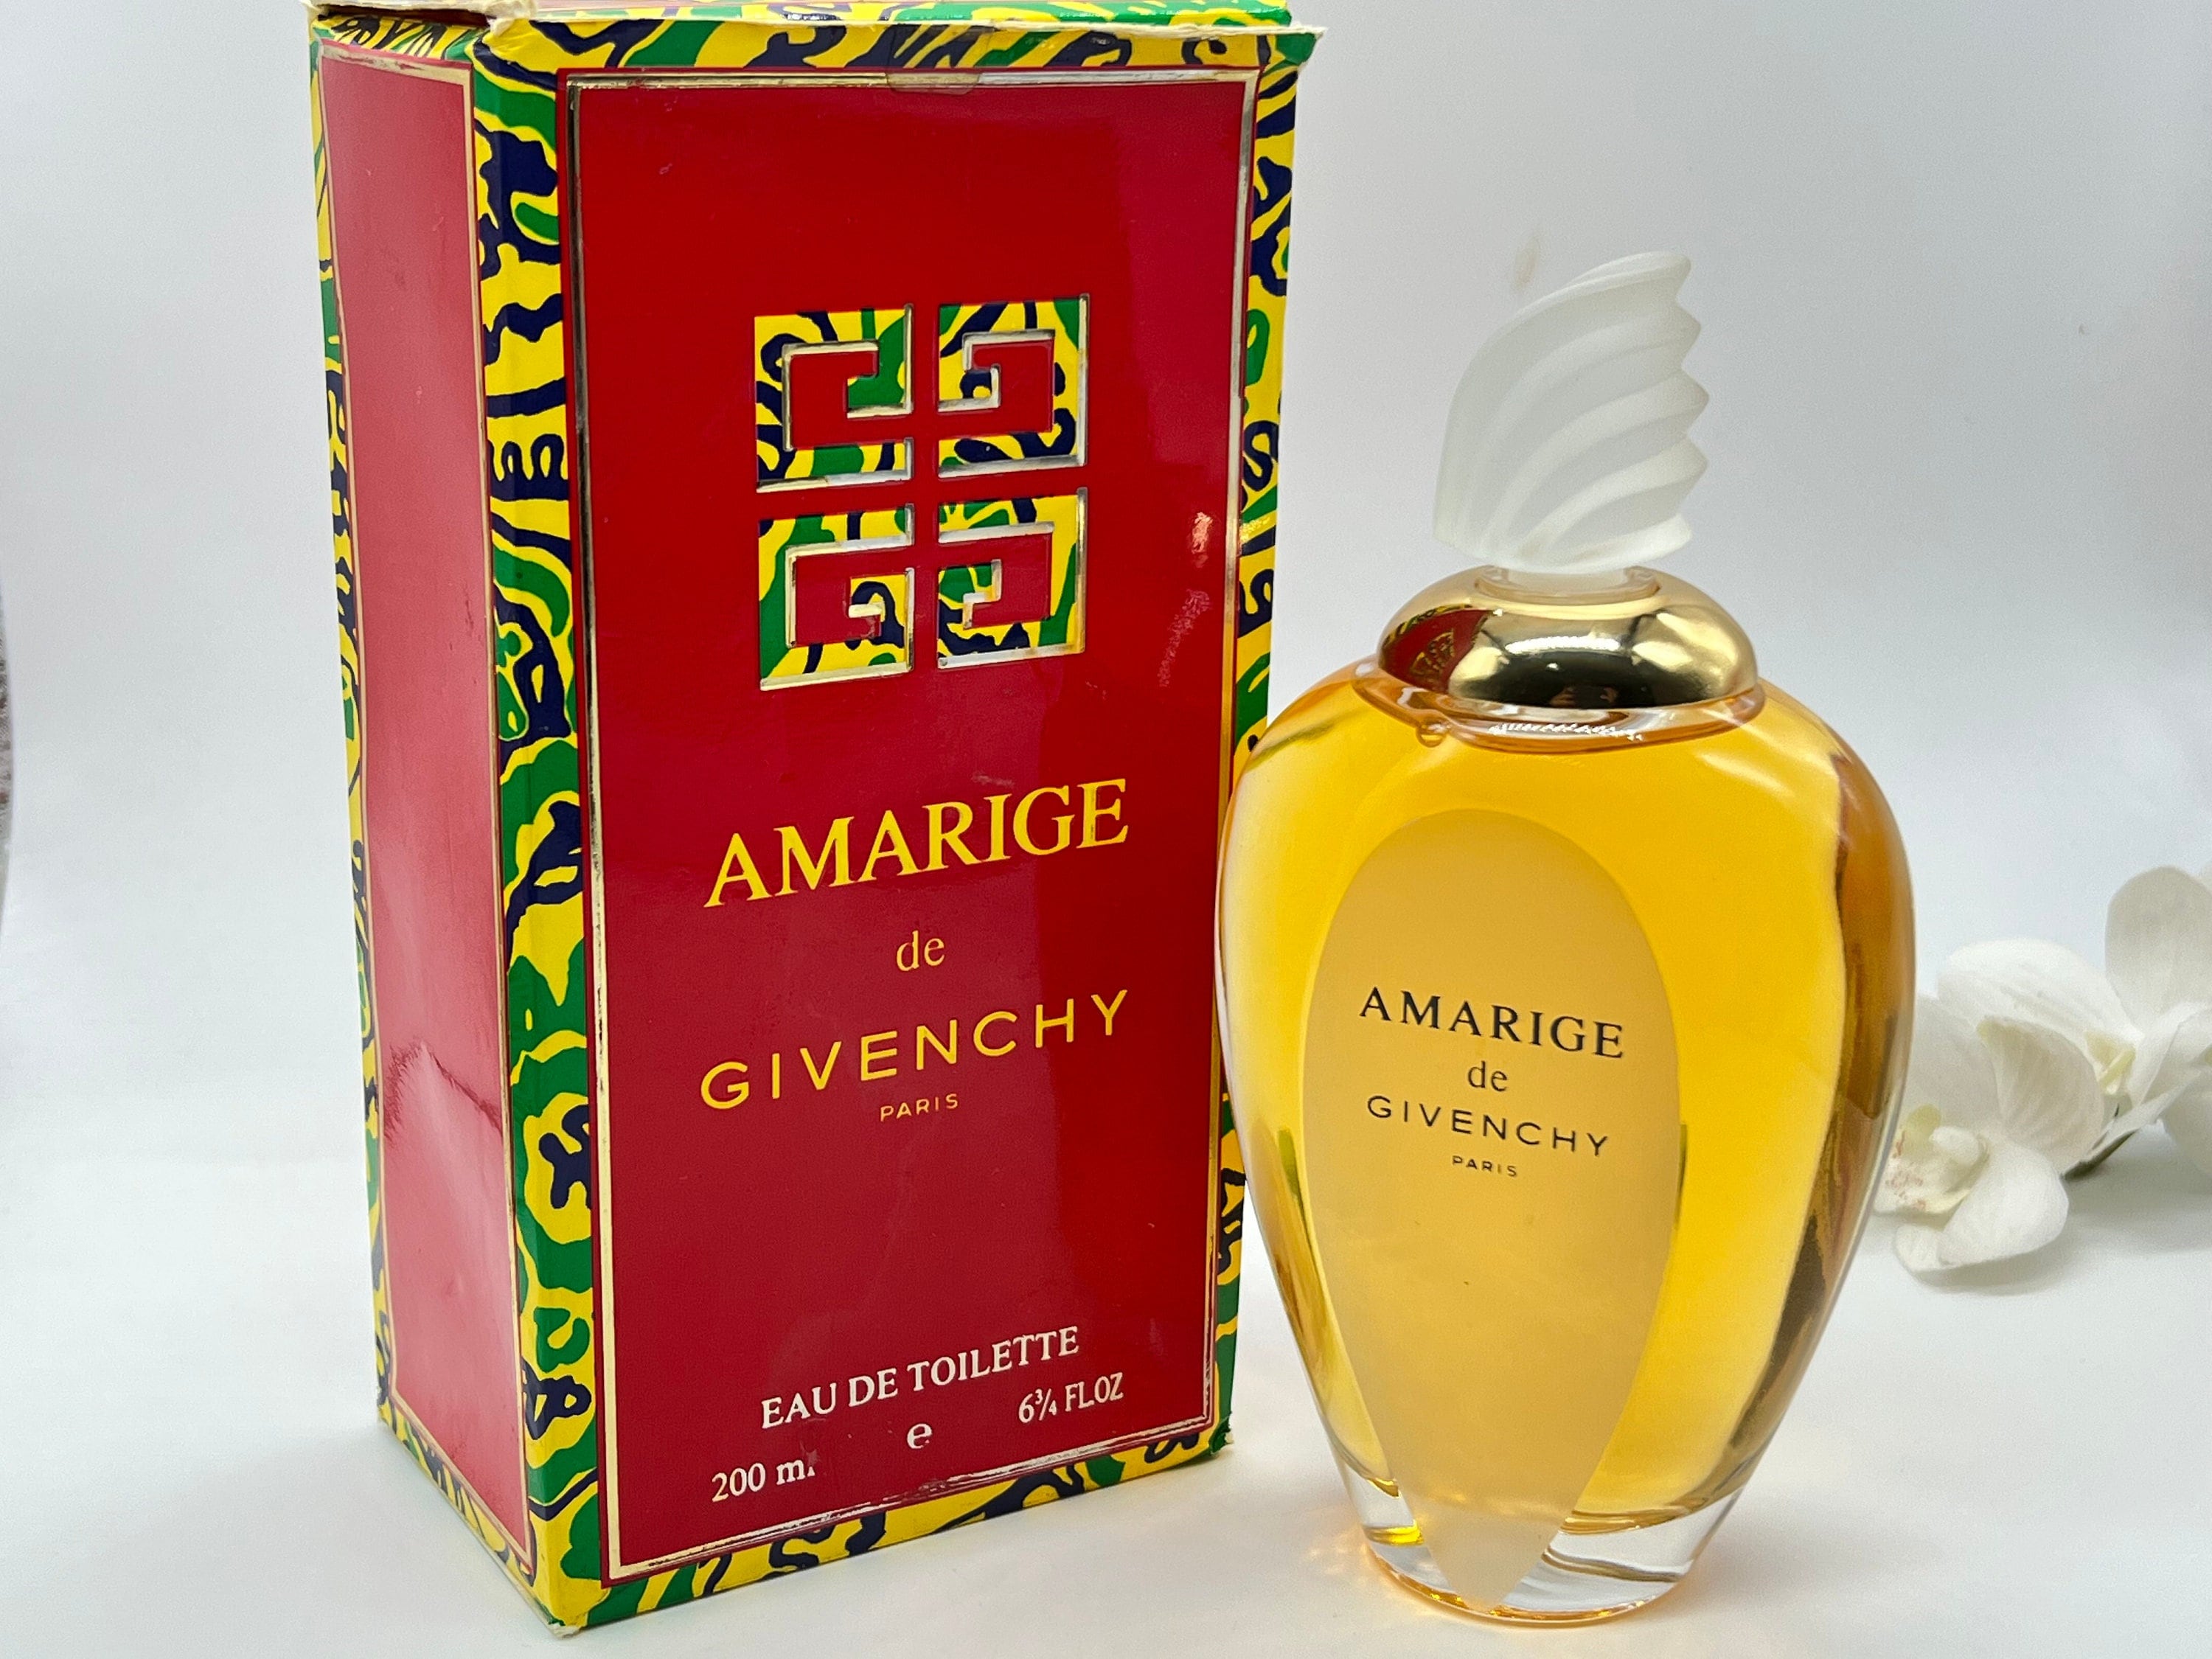 Parfums Givenchy Bag Used in Promotional Item for Amarige 